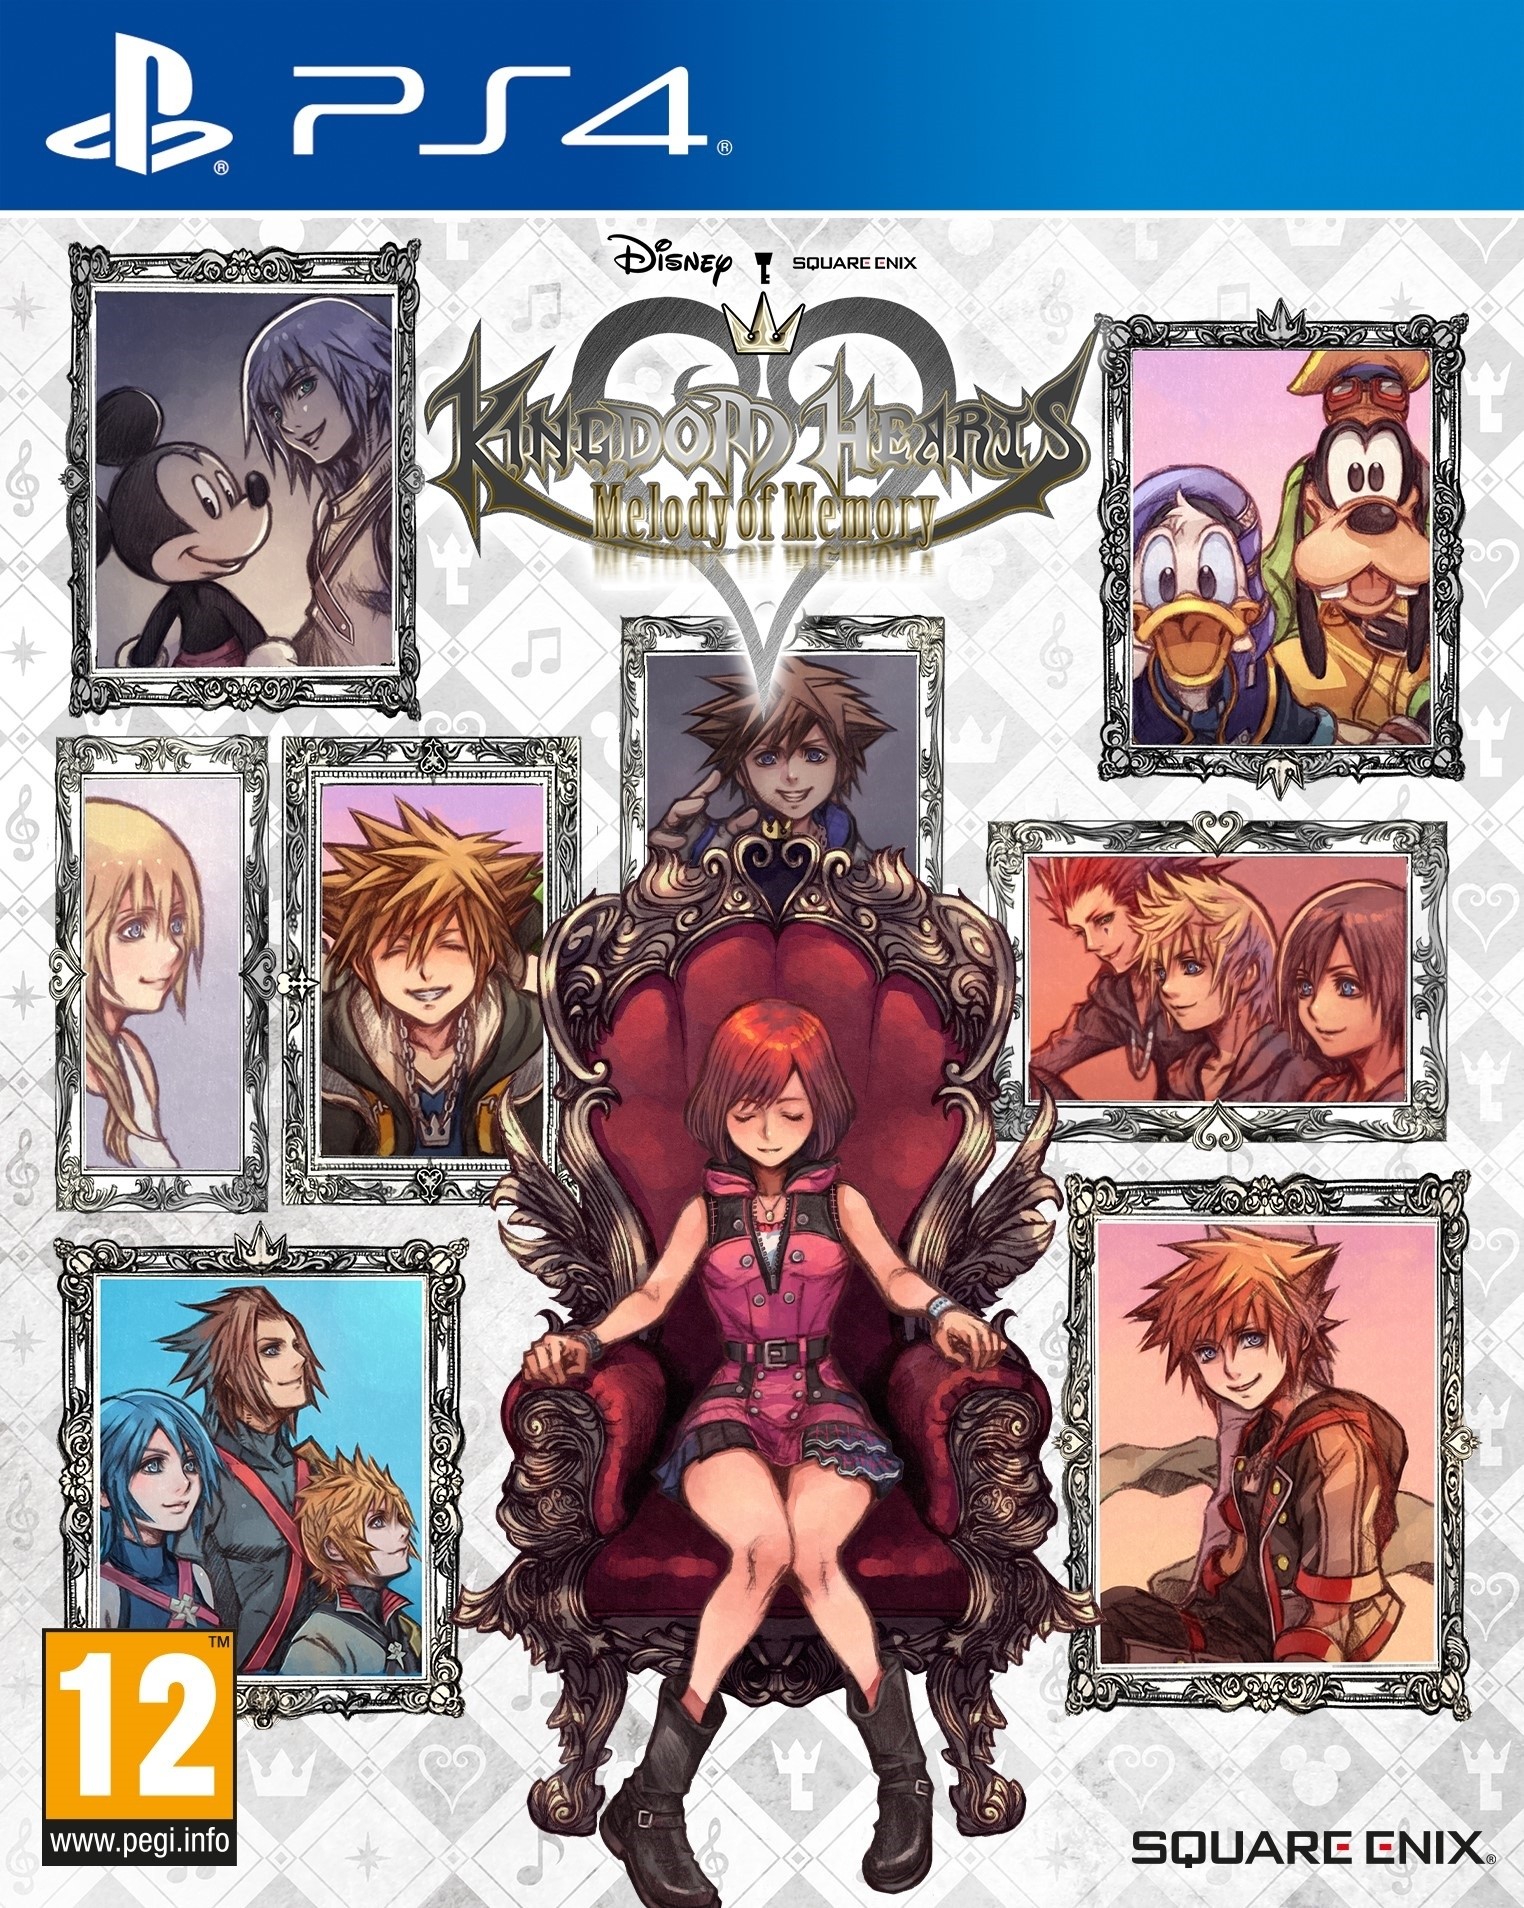 Square Enix Kingdom hearts melody of memory standard edition - ps4